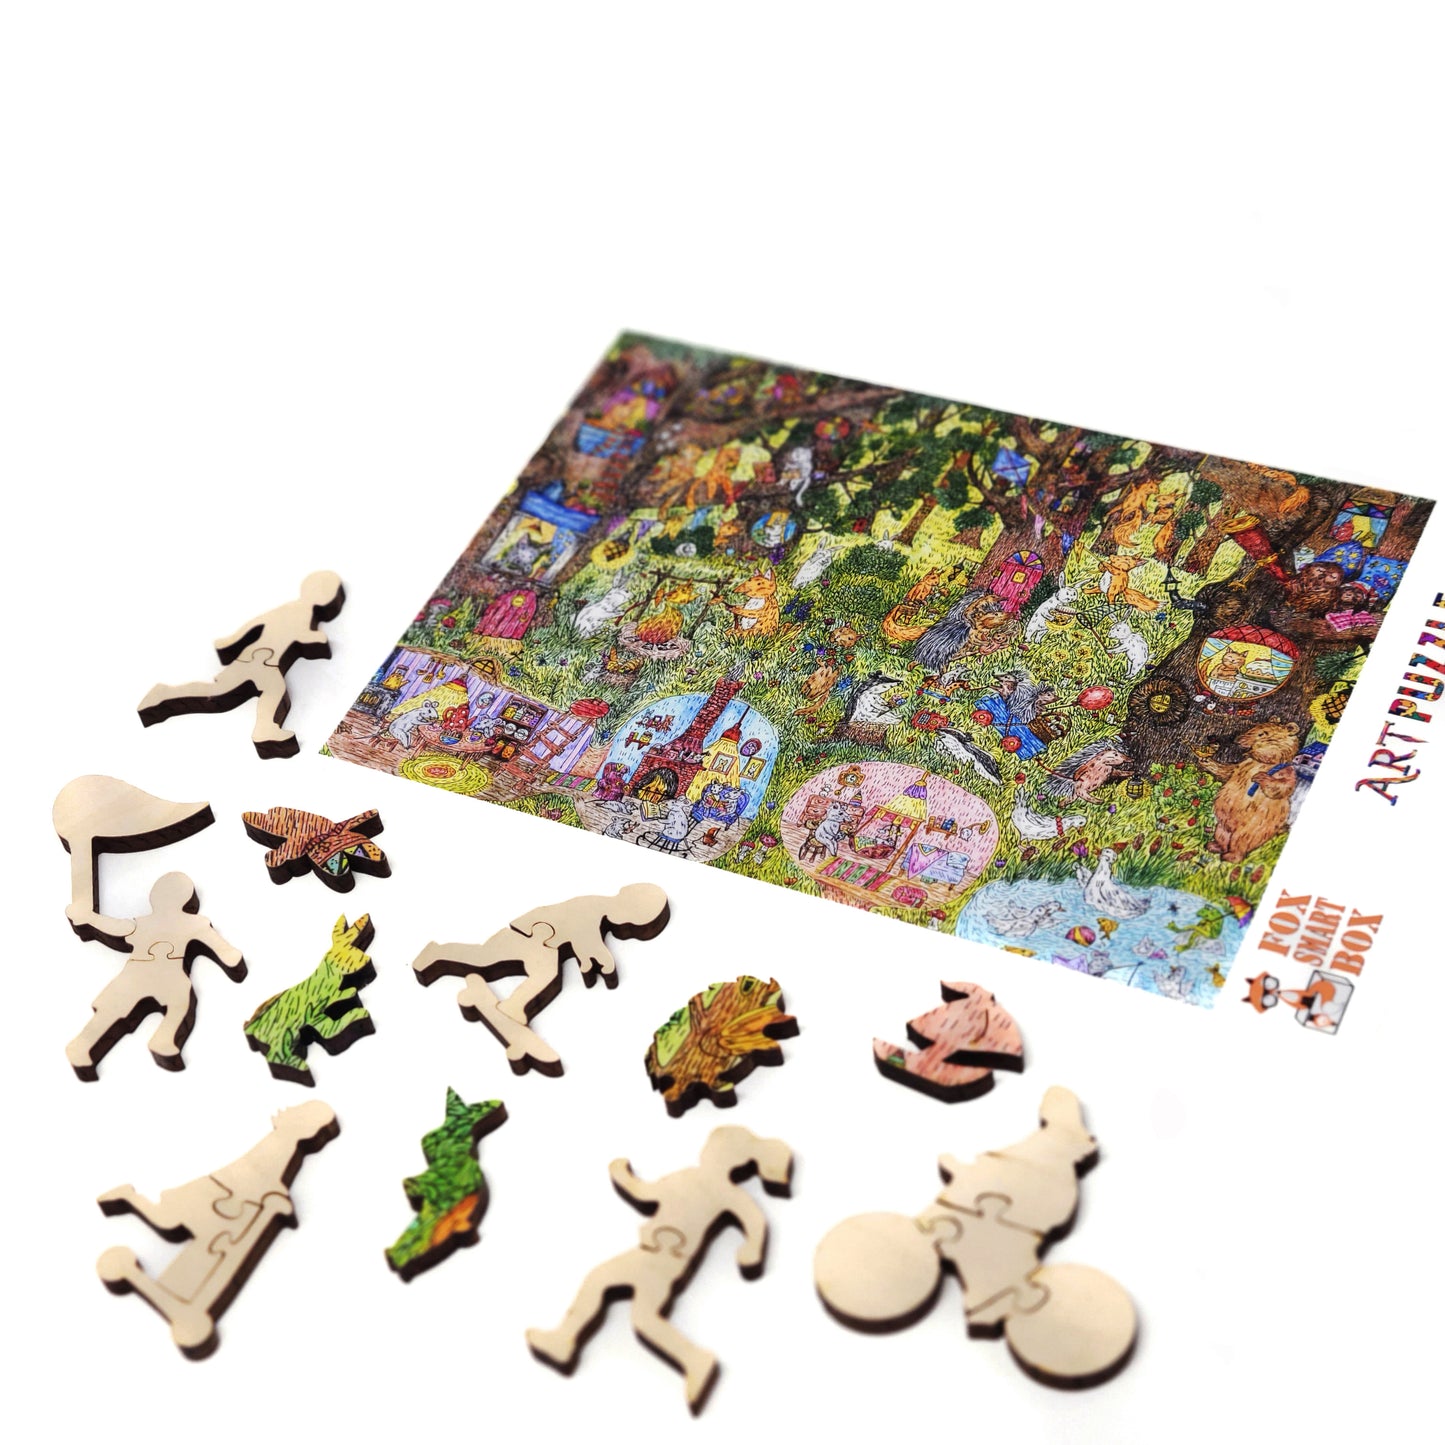 Wooden Jigsaw Puzzle with Uniquely Shaped Pieces for Adults - 505 Pieces - Fairy Forest. Summer